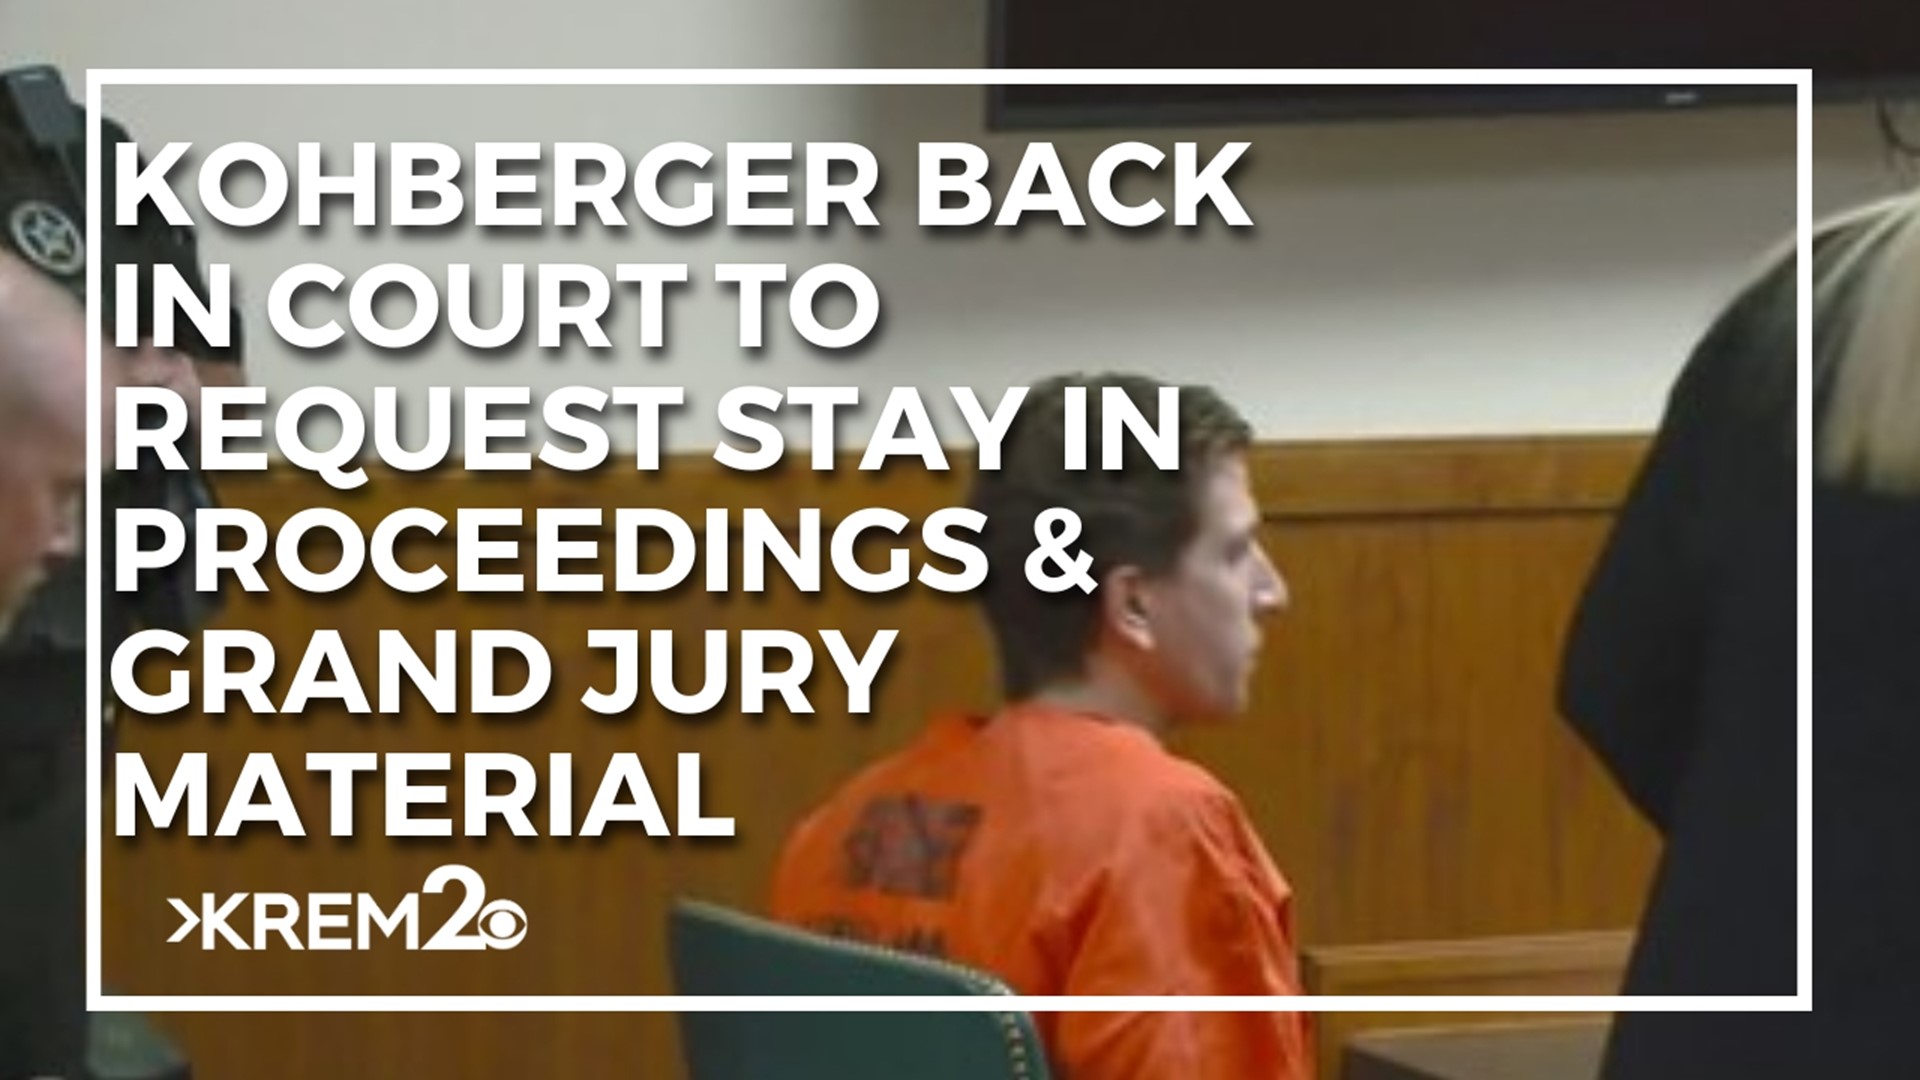 Bryan Kohberger, the 28-year-old suspect in the Moscow murders, is requesting a stay of proceedings and the release of grand jury materials.